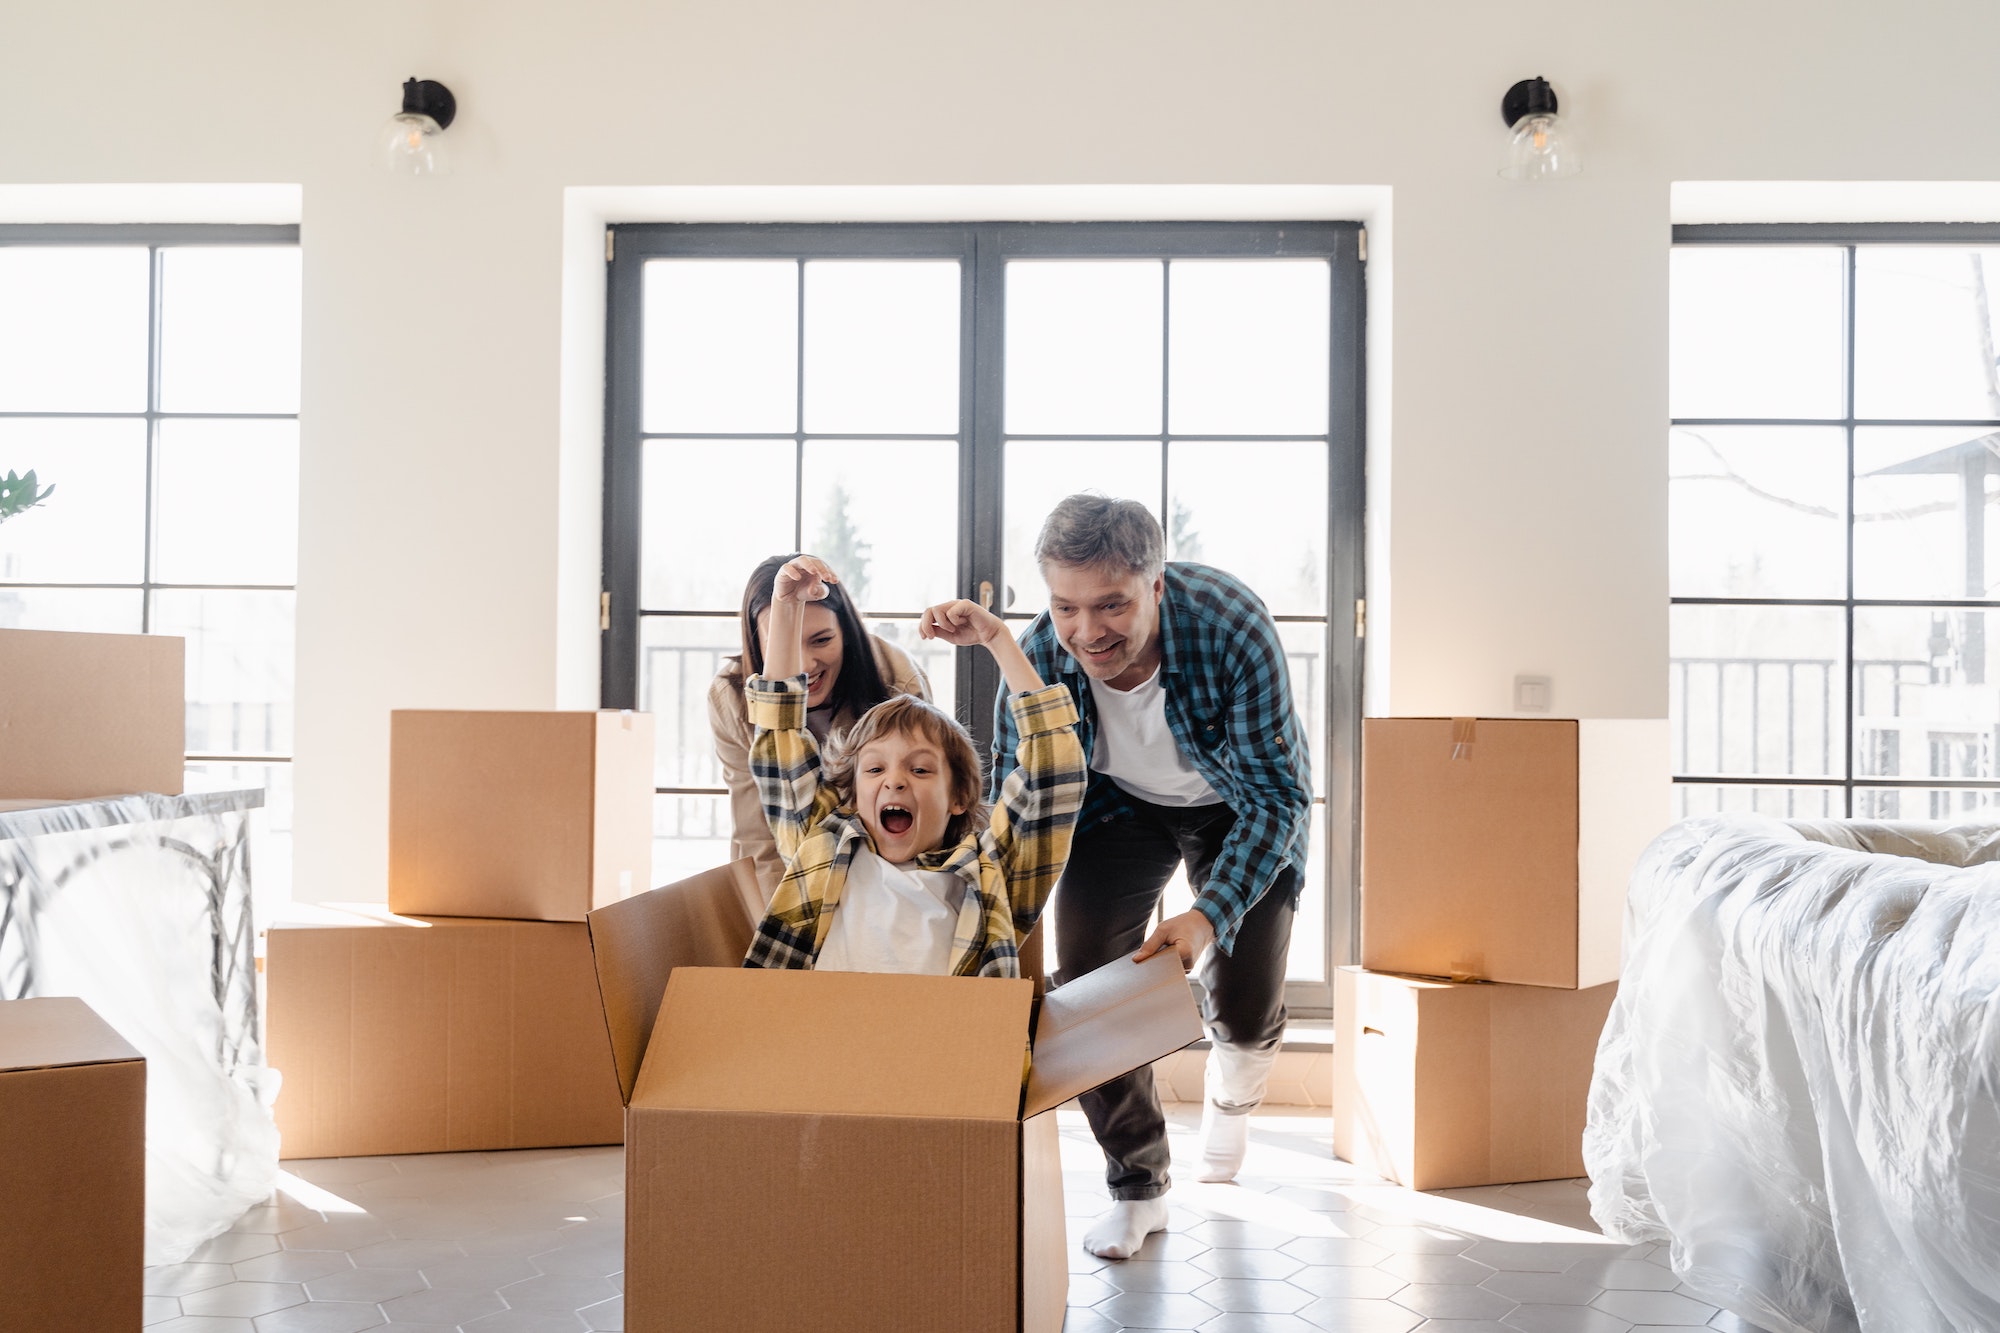 Family moving into new home. Photo by MART PRODUCTION from Pexels